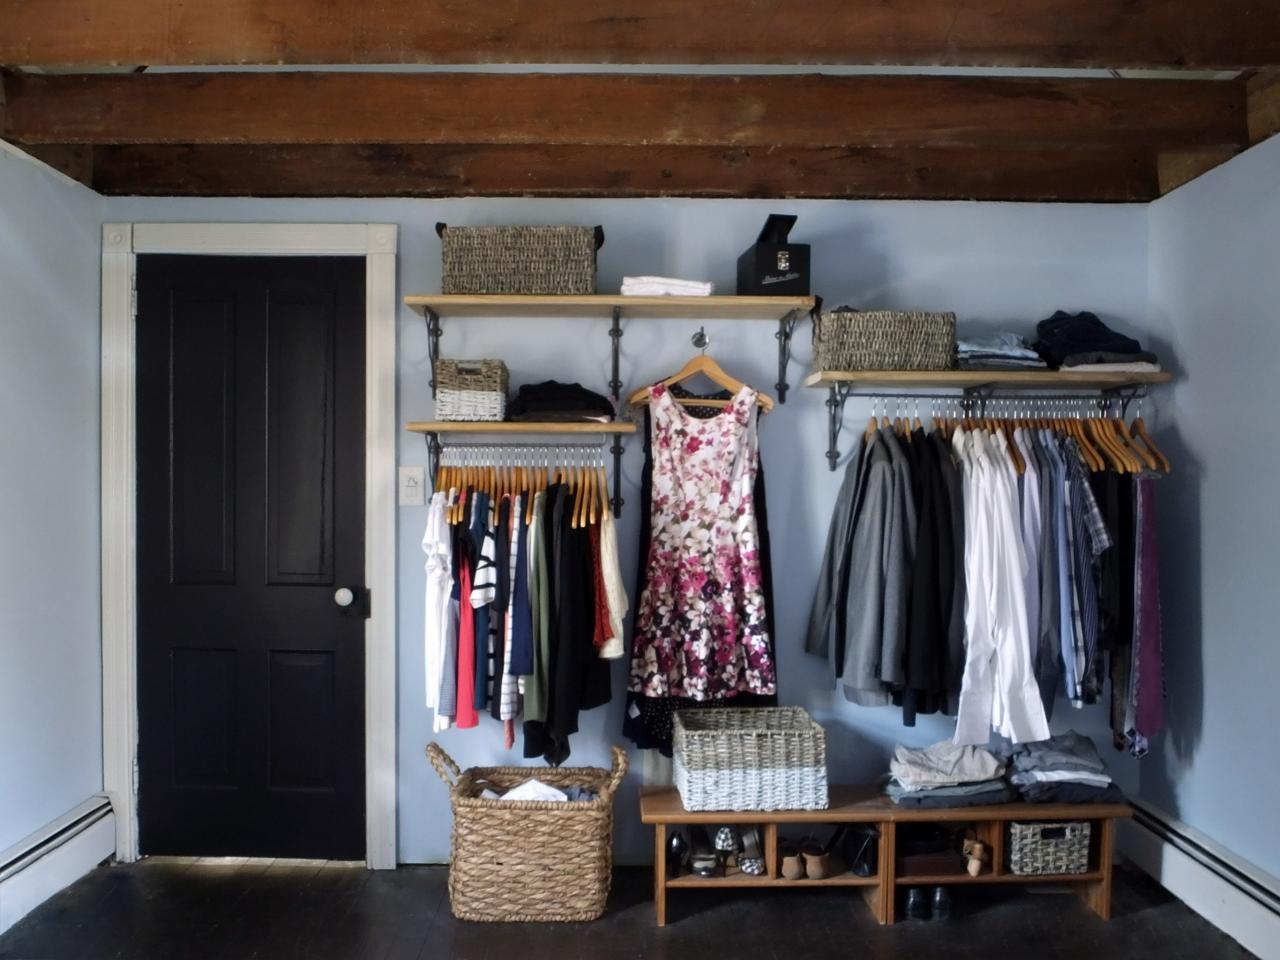 20 Clothing Storage Ideas If You Don't Have a Closet